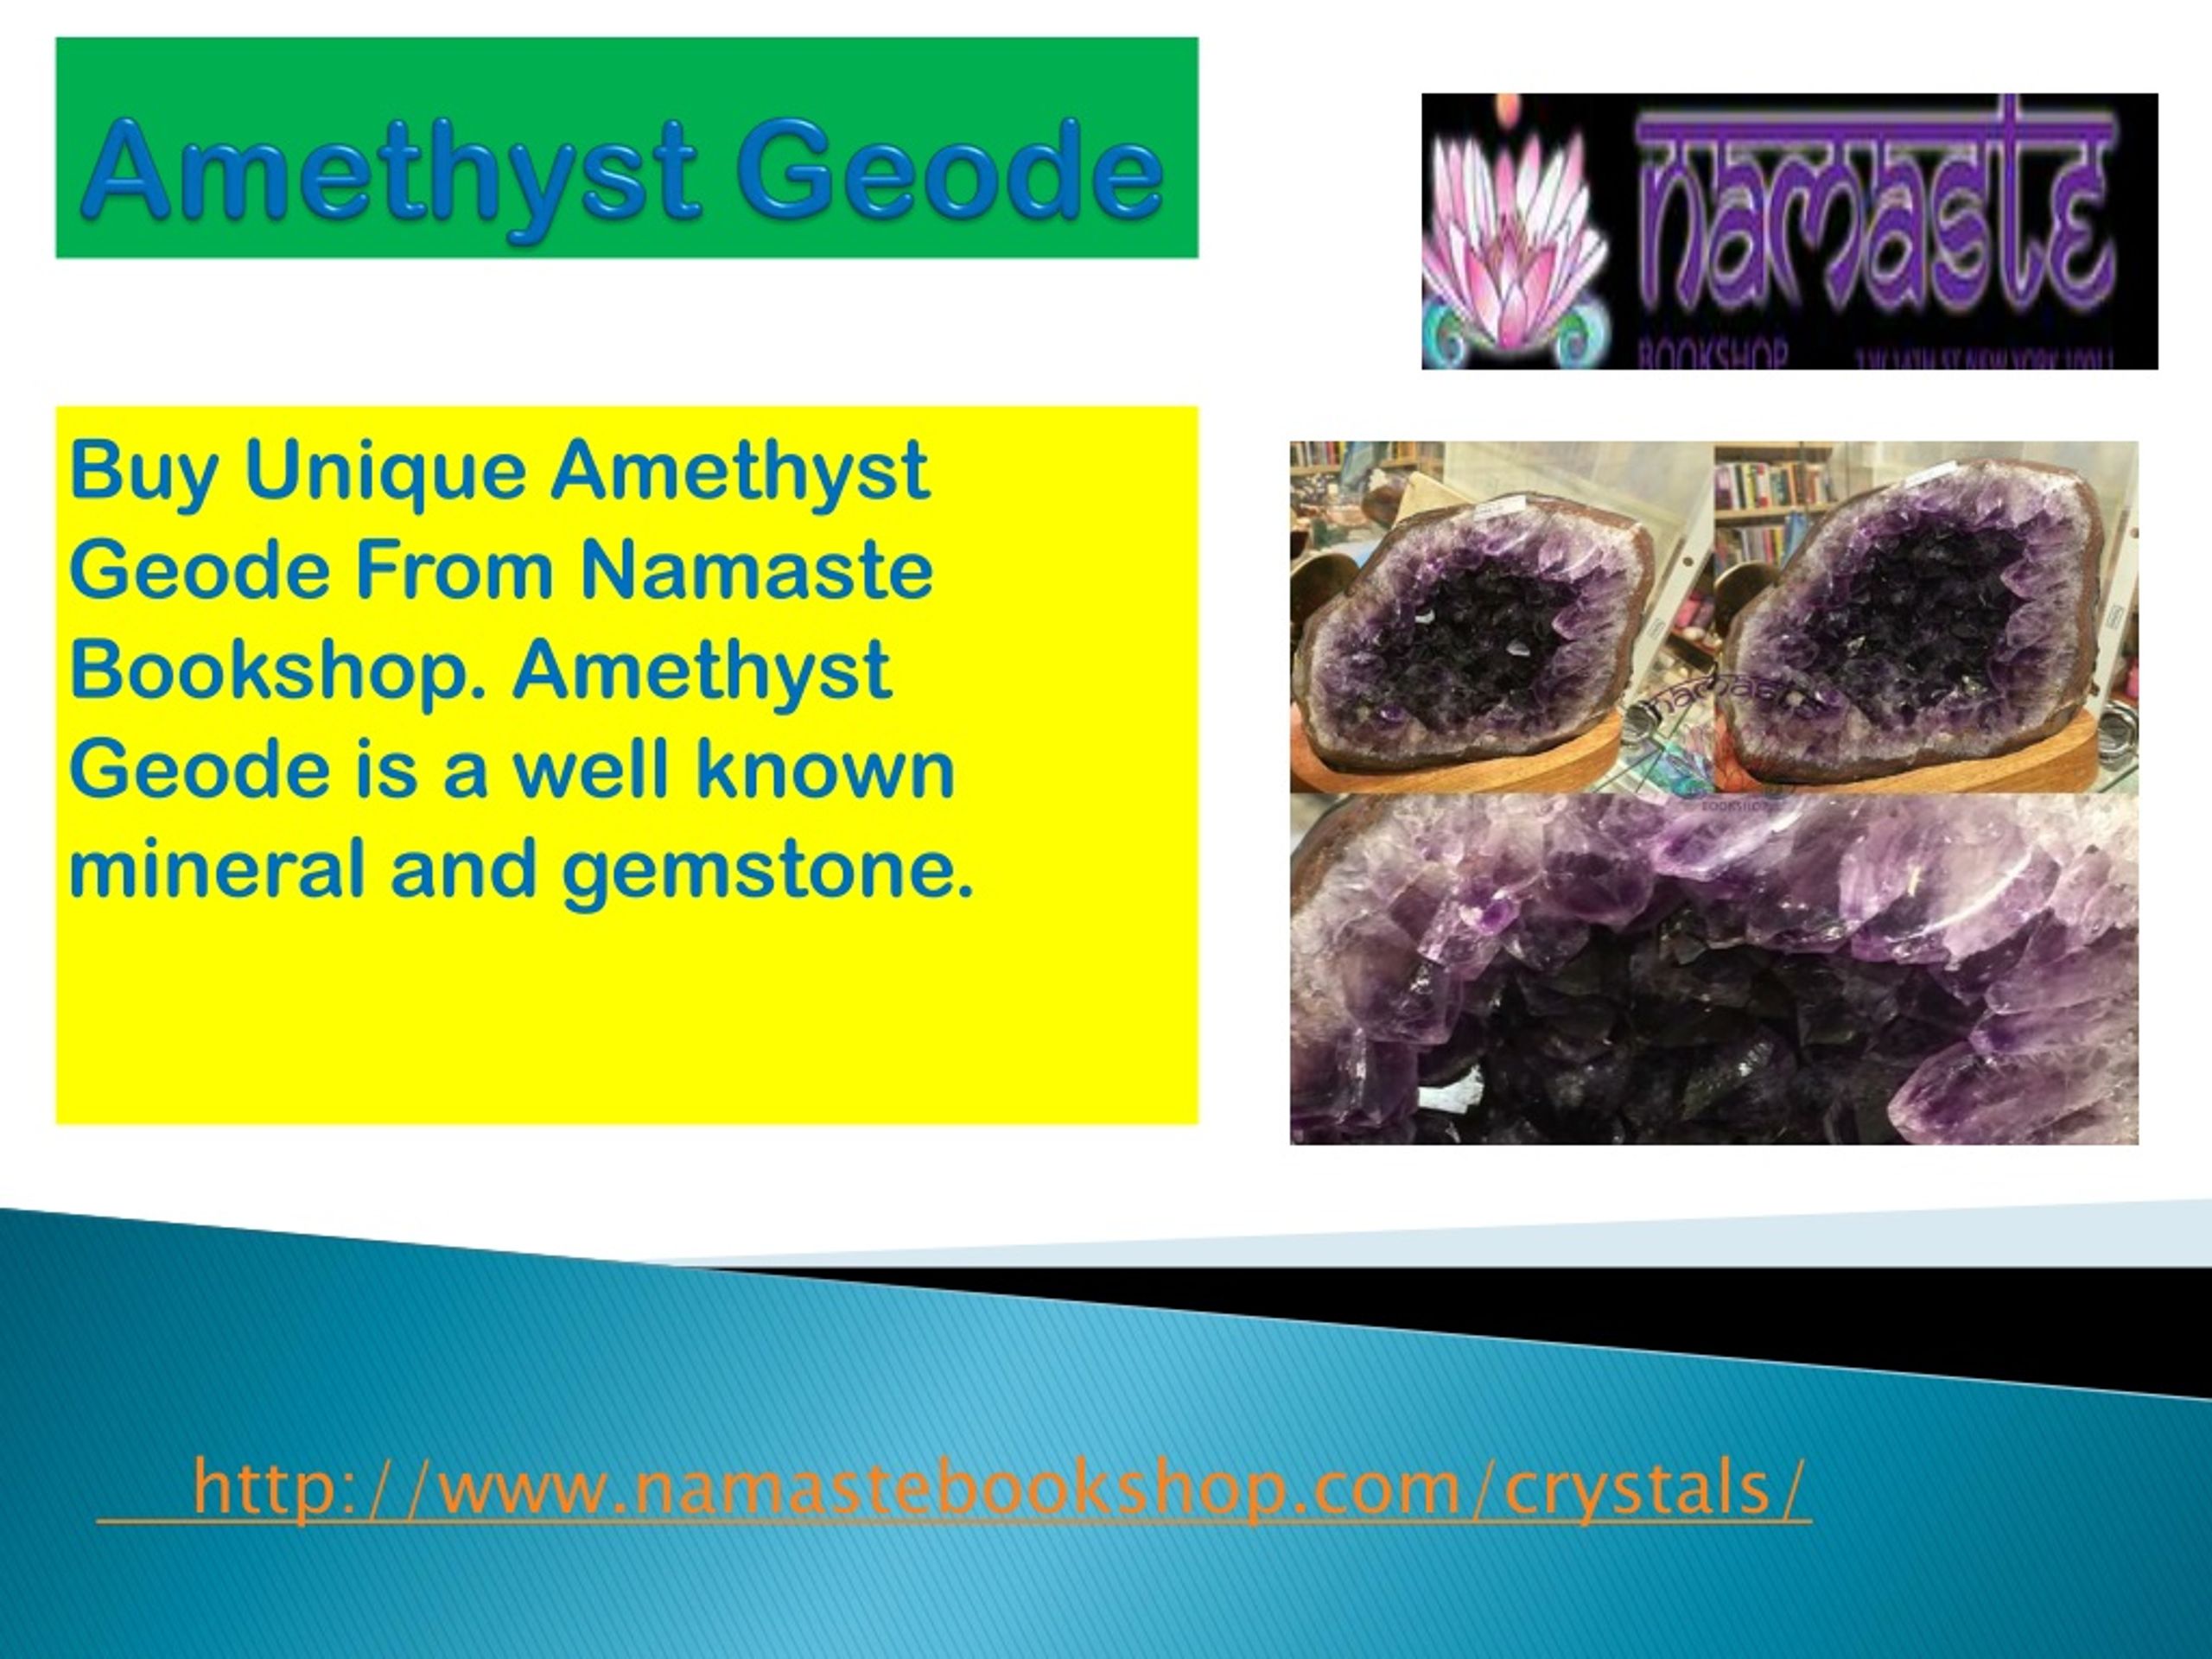 PPT - crystals stores nyc PowerPoint Presentation, free download - ID ...